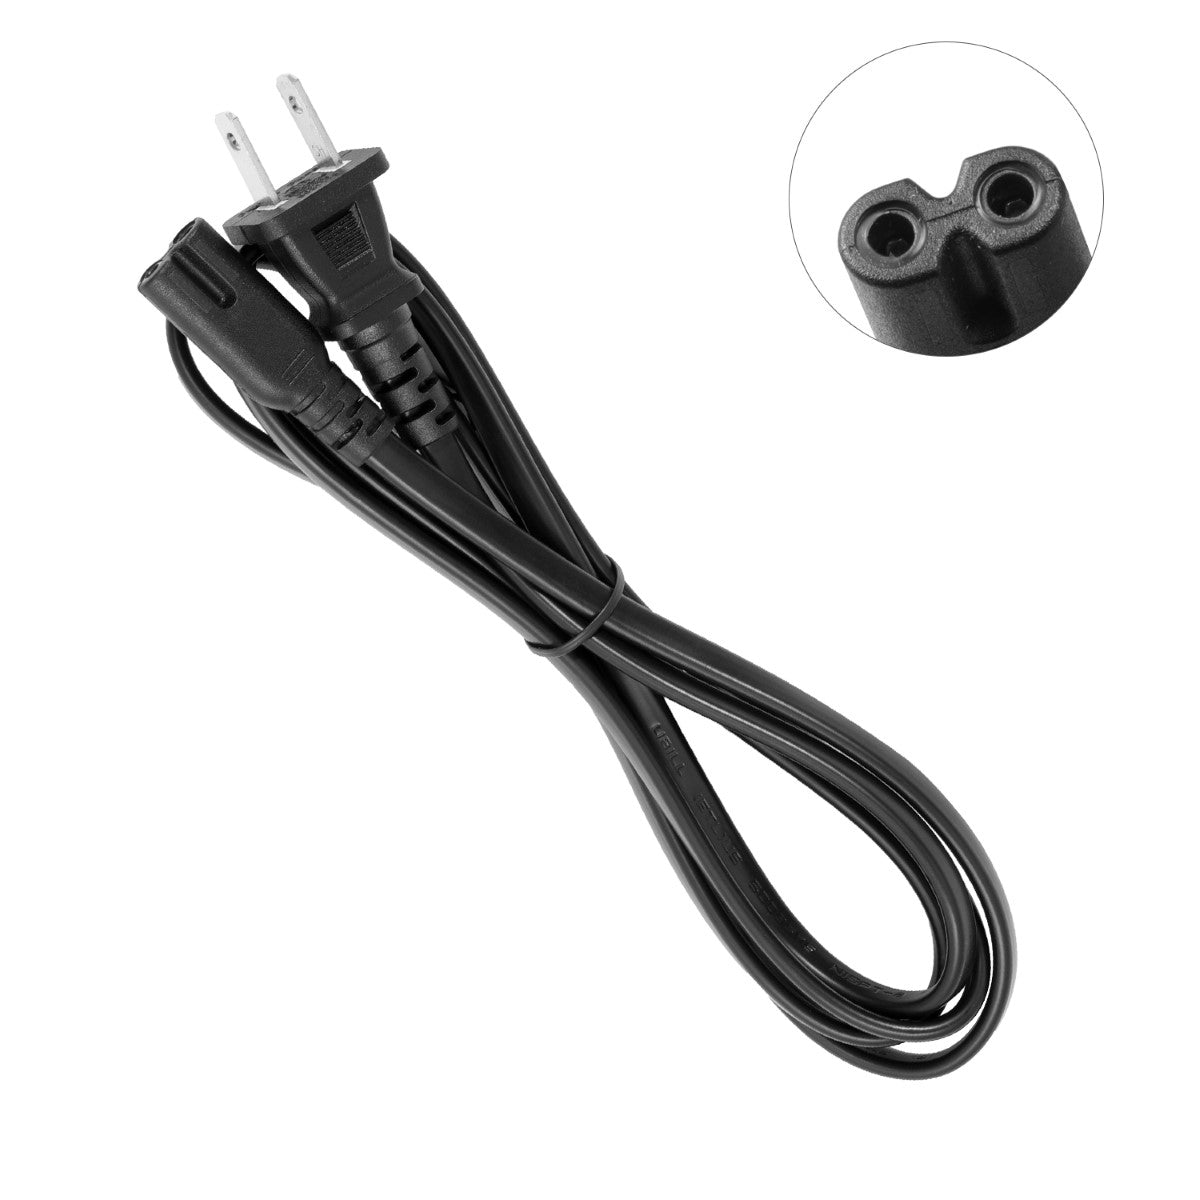 Power Cord for HP ENVY 7640 All-in-One Printer.